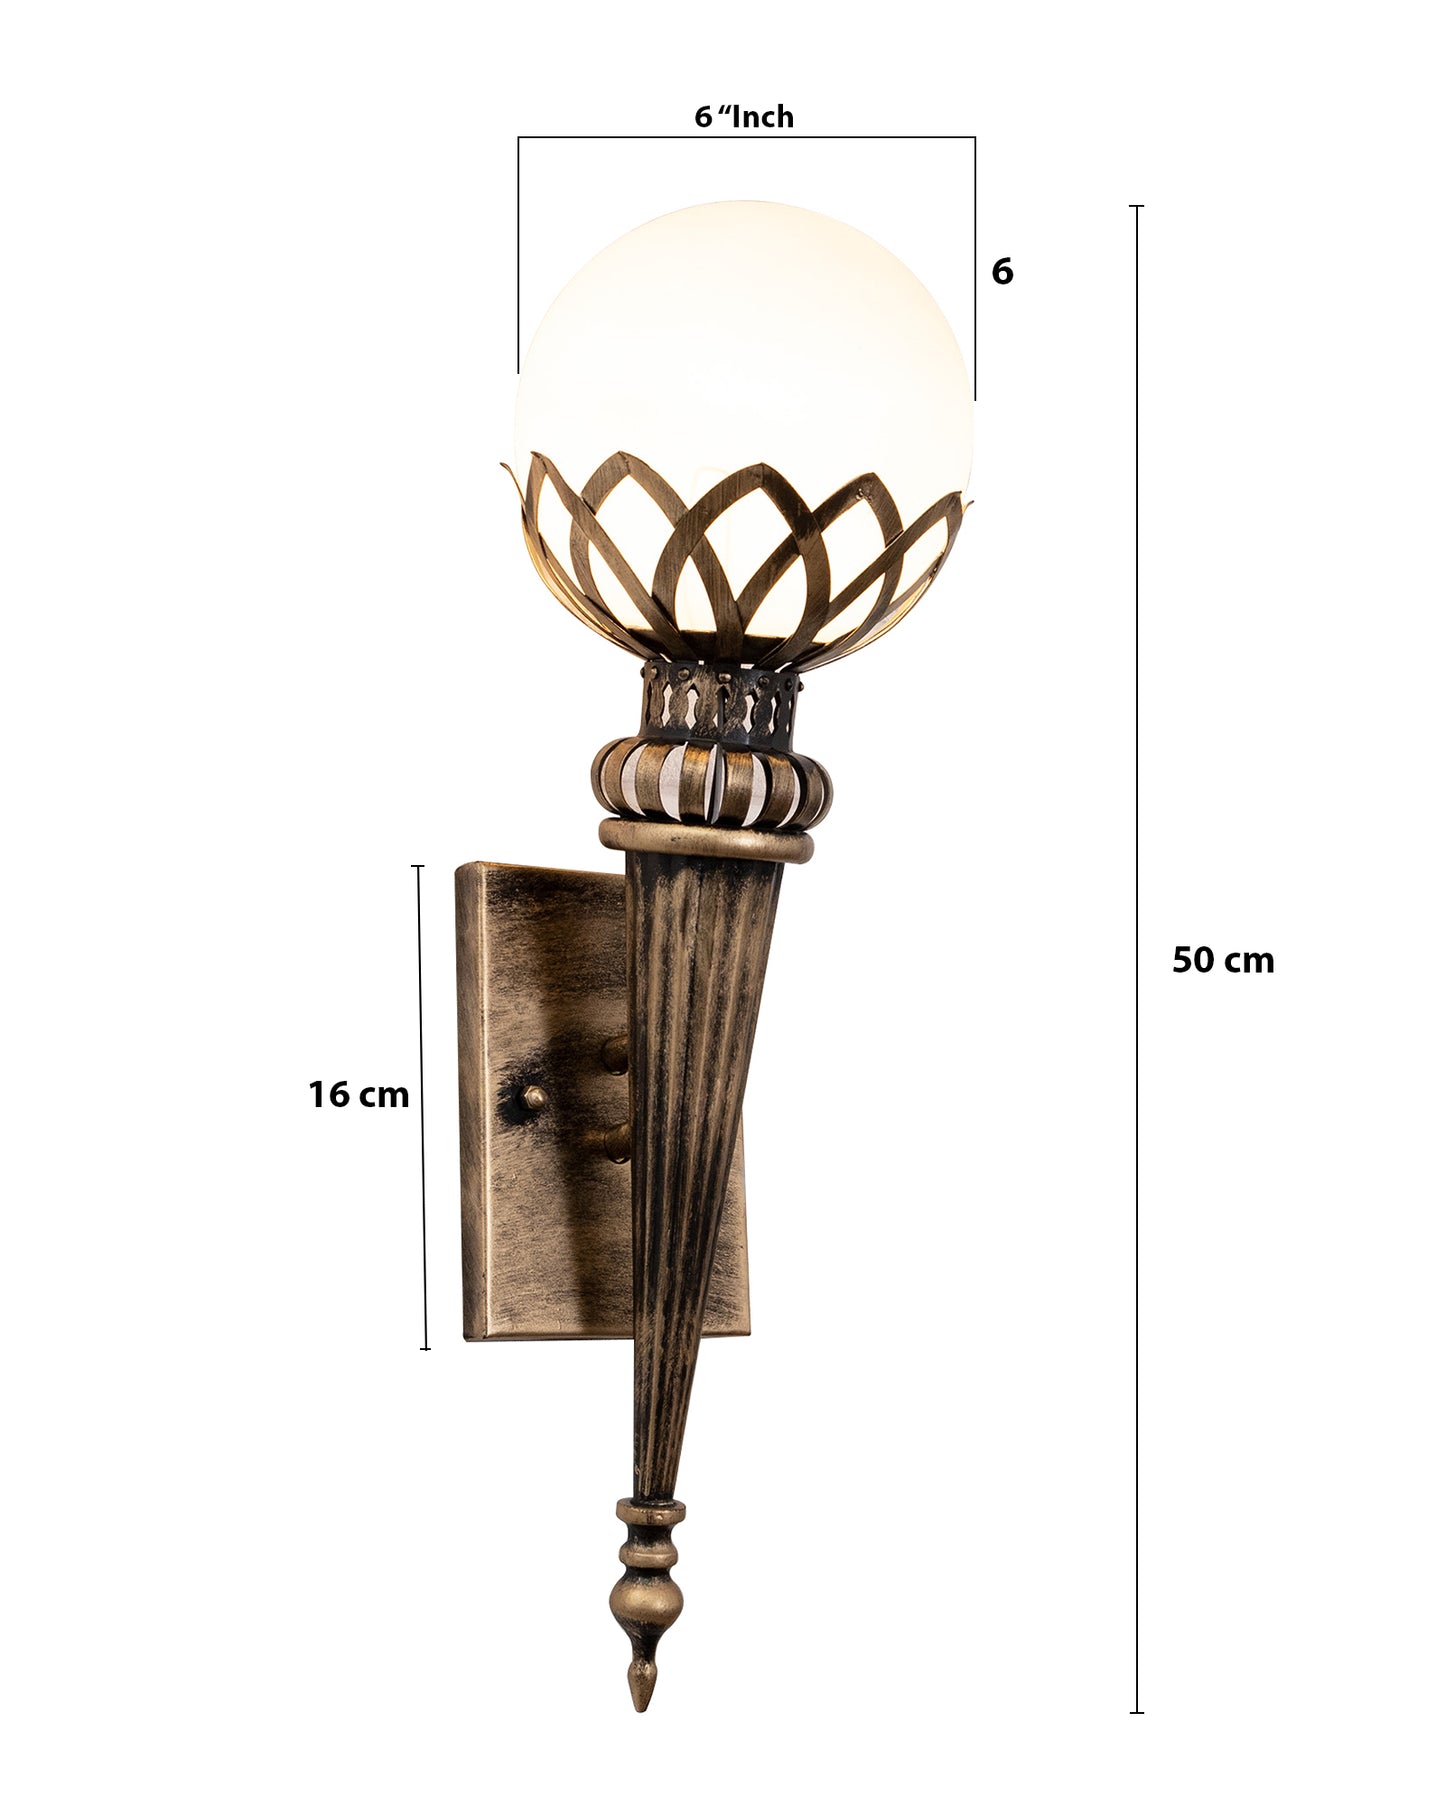 Filigree Wall Torch Rustic Wall Light Fixtures, Oil Rubbed Bronze Finish Indoor Vintage Wall Sconce Industrial Lamp Fixture Glass Shade Farmhouse Metal Sconces for Bedroom Living Room Cafe